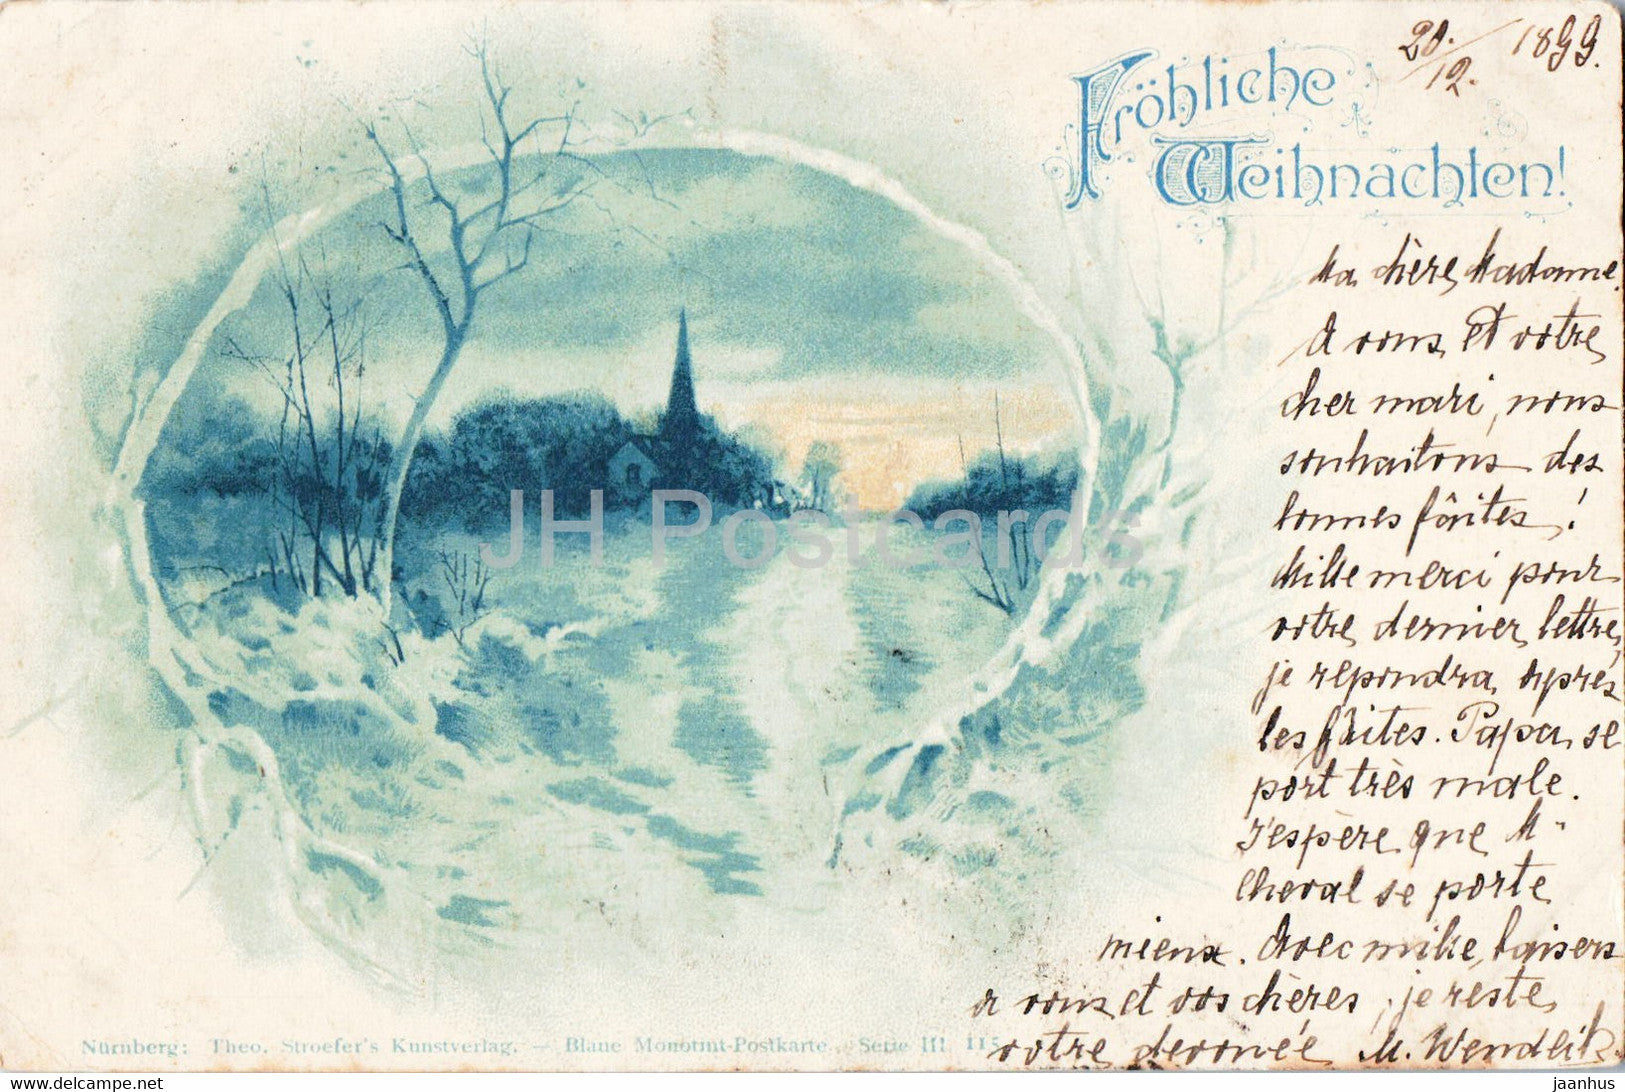 New Year Greeting Card - Frohliche Weihnachten - Theo Stroefer's Kunstverlag - old postcard - 1899 - Austria - used - JH Postcards